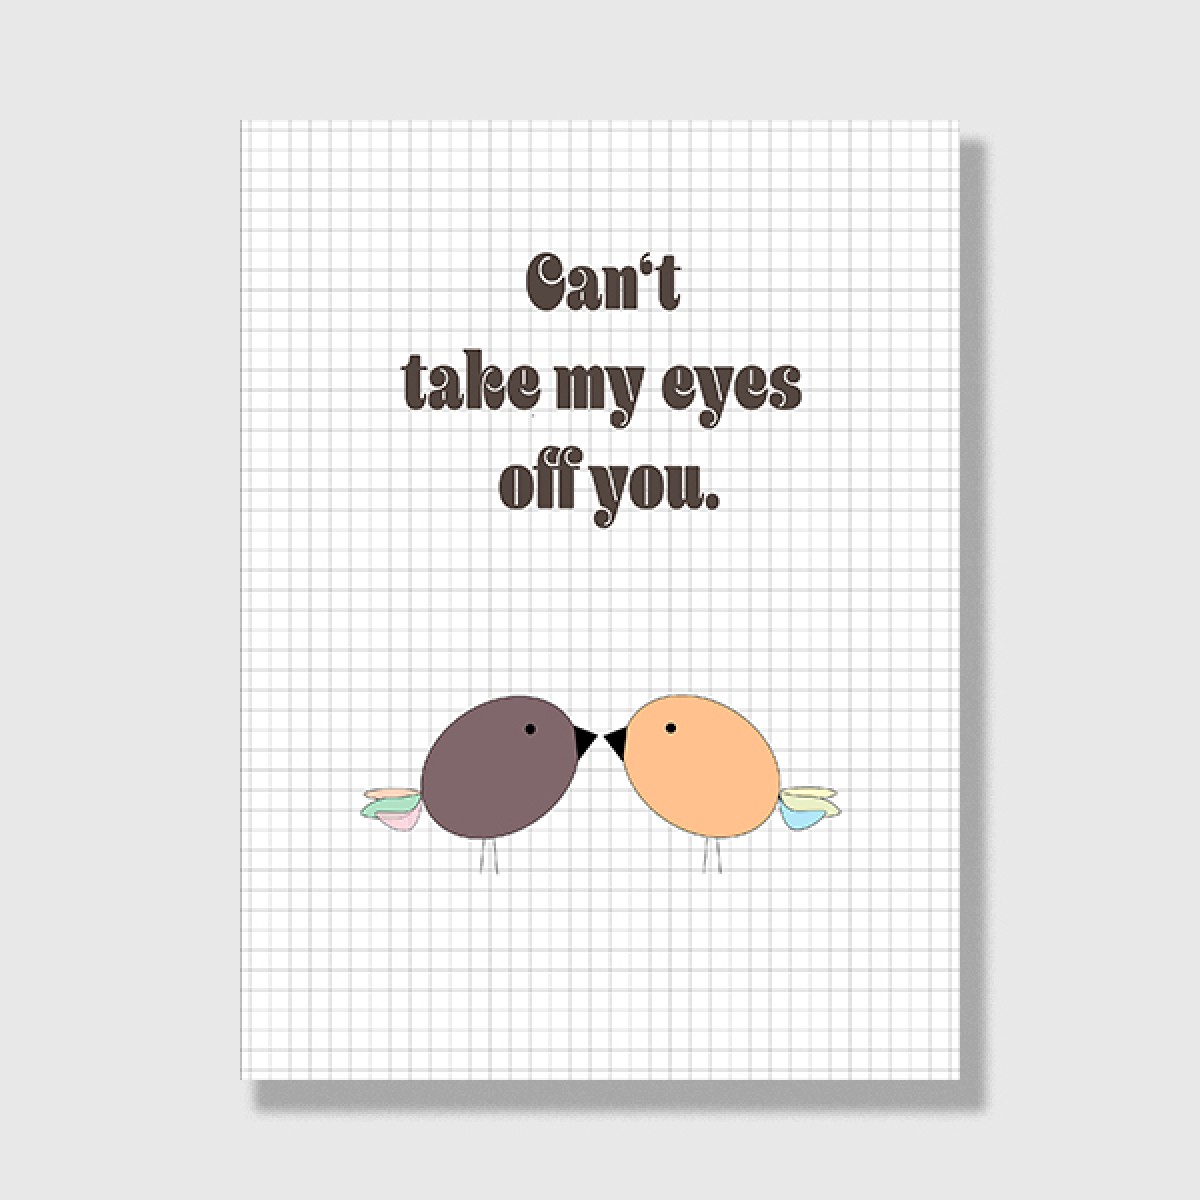 ZEITLOOPS "Can't take my eyes off you", Posterprint 30x40 cm